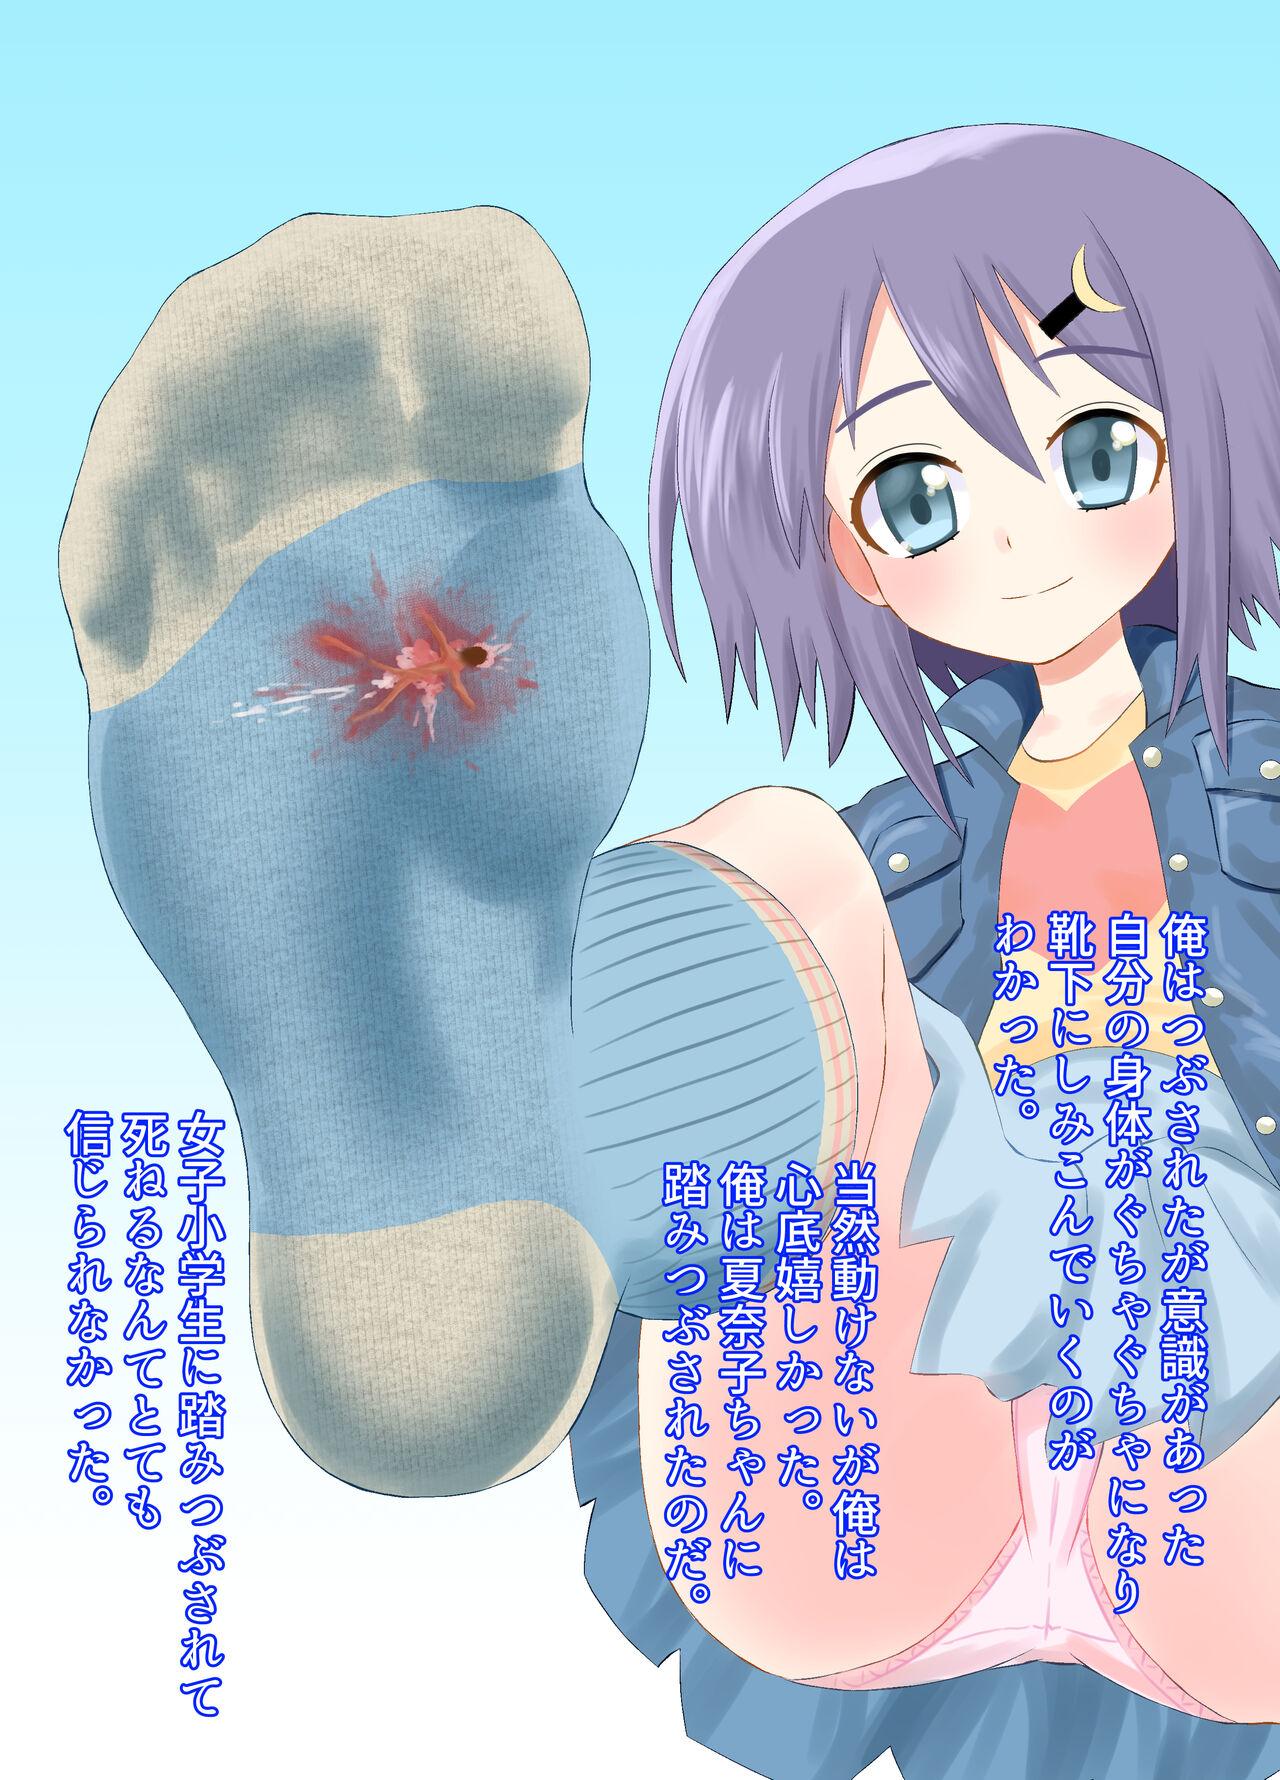 A CG collection of getting smaller and being stepped on by a girl 40